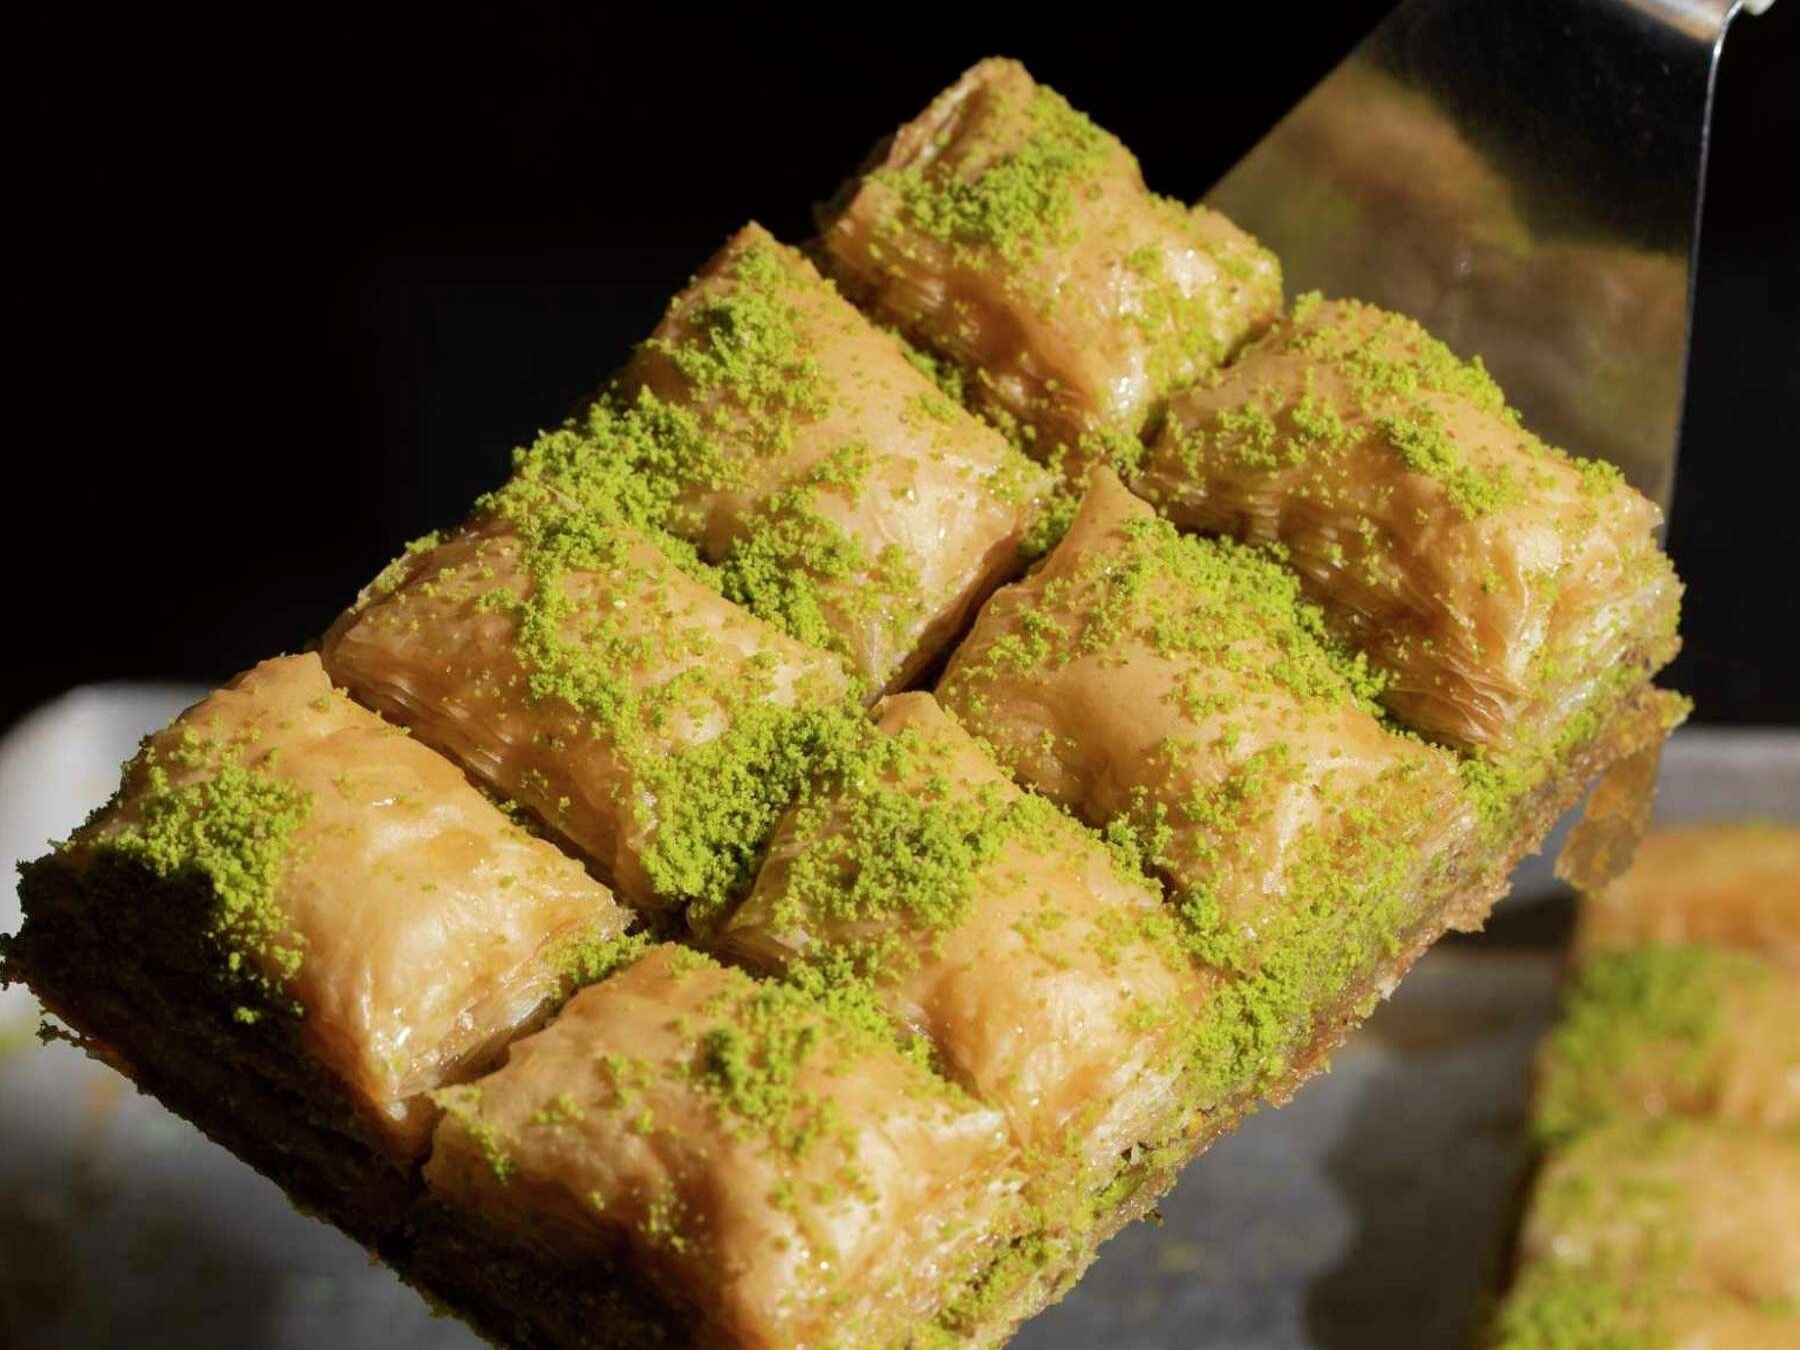 For the crispiest baklava, this Bay Area baker makes 40-layer dough from scratch